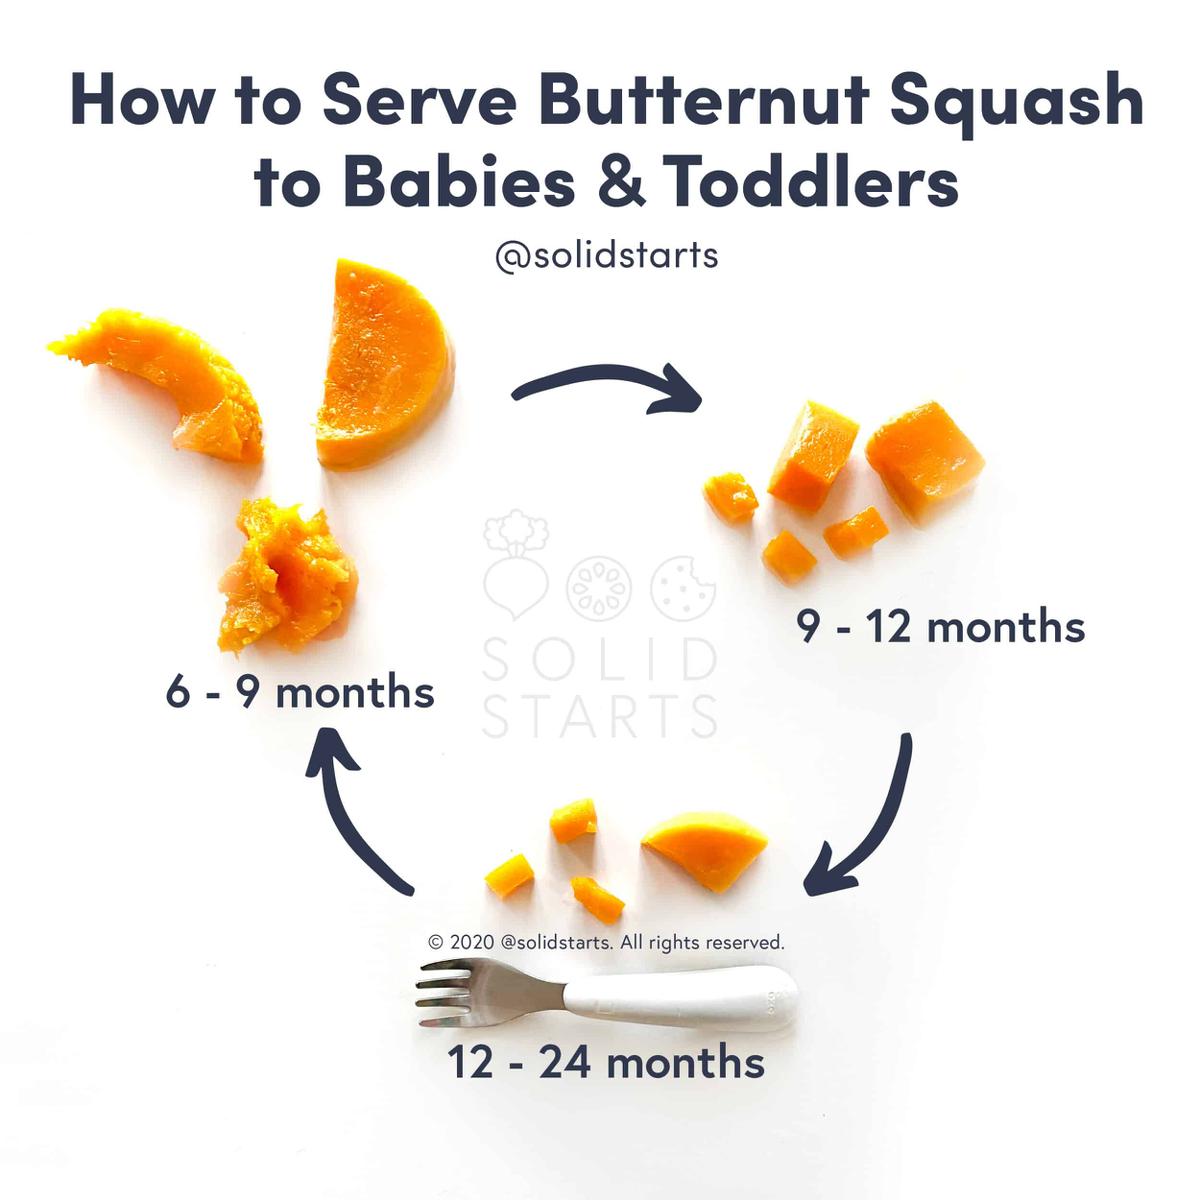 Butternut Squash for Babies-Serve Butternut Squash to Baby - Solid Starts